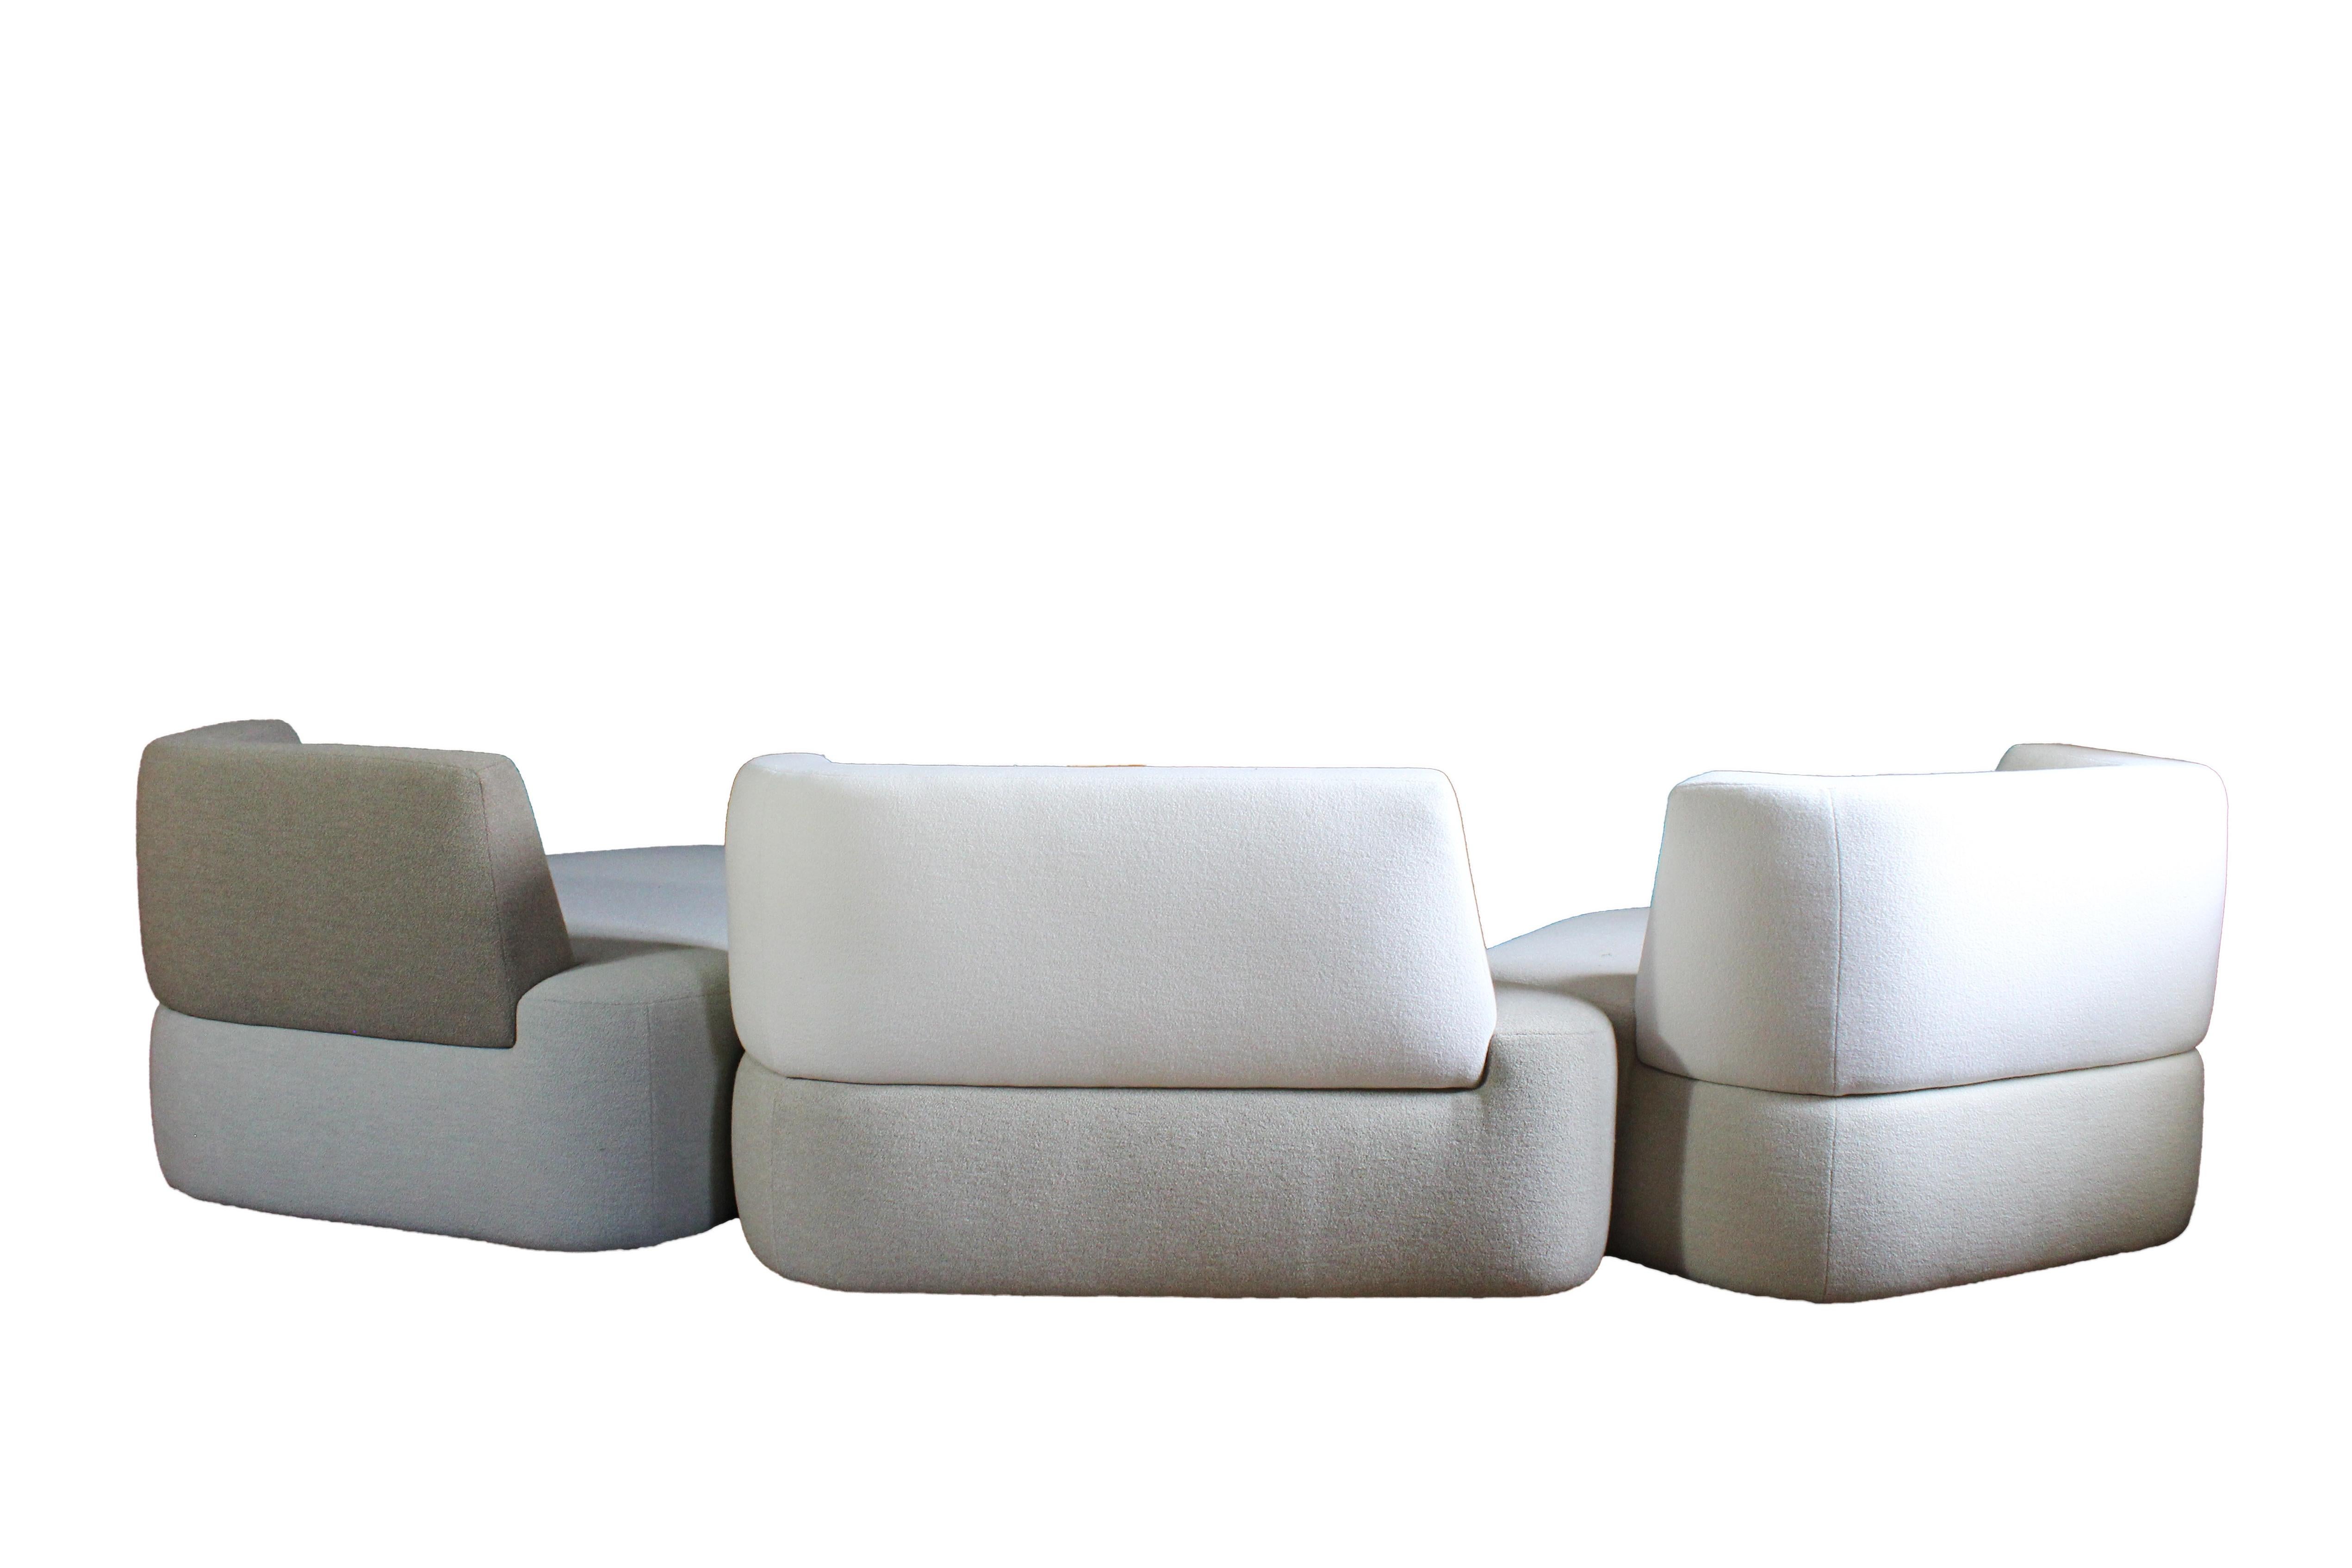 Fabric Organic Sofa in White Cream Brown Wool Handmade in France 3 sets For Sale